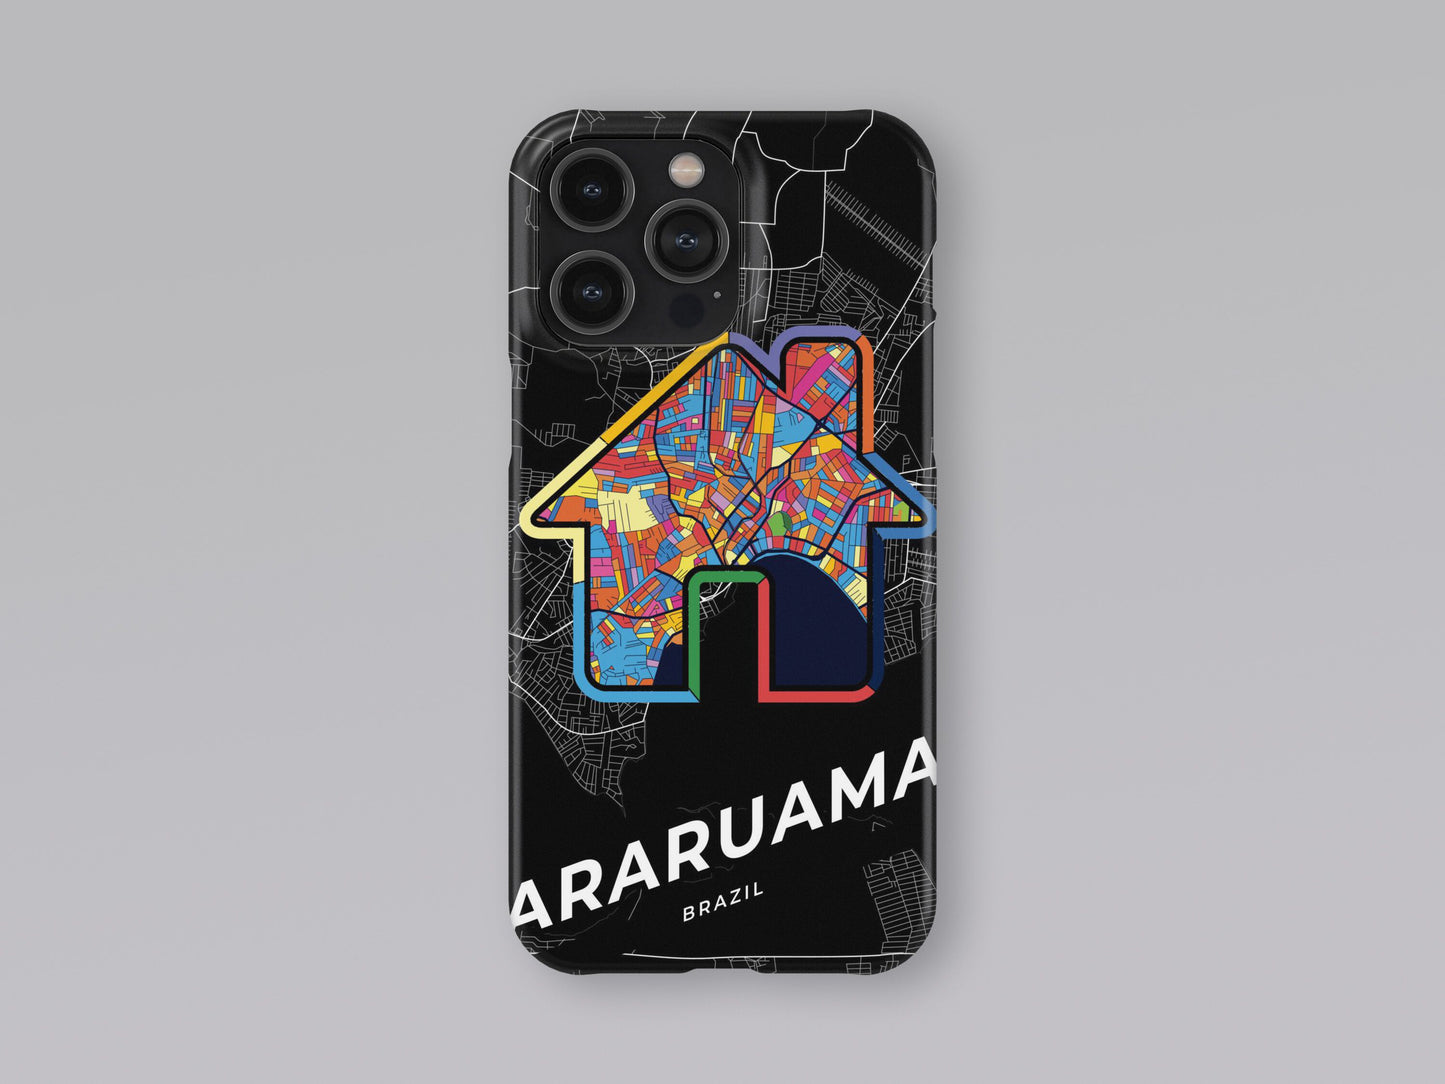 Araruama Brazil slim phone case with colorful icon. Birthday, wedding or housewarming gift. Couple match cases. 3